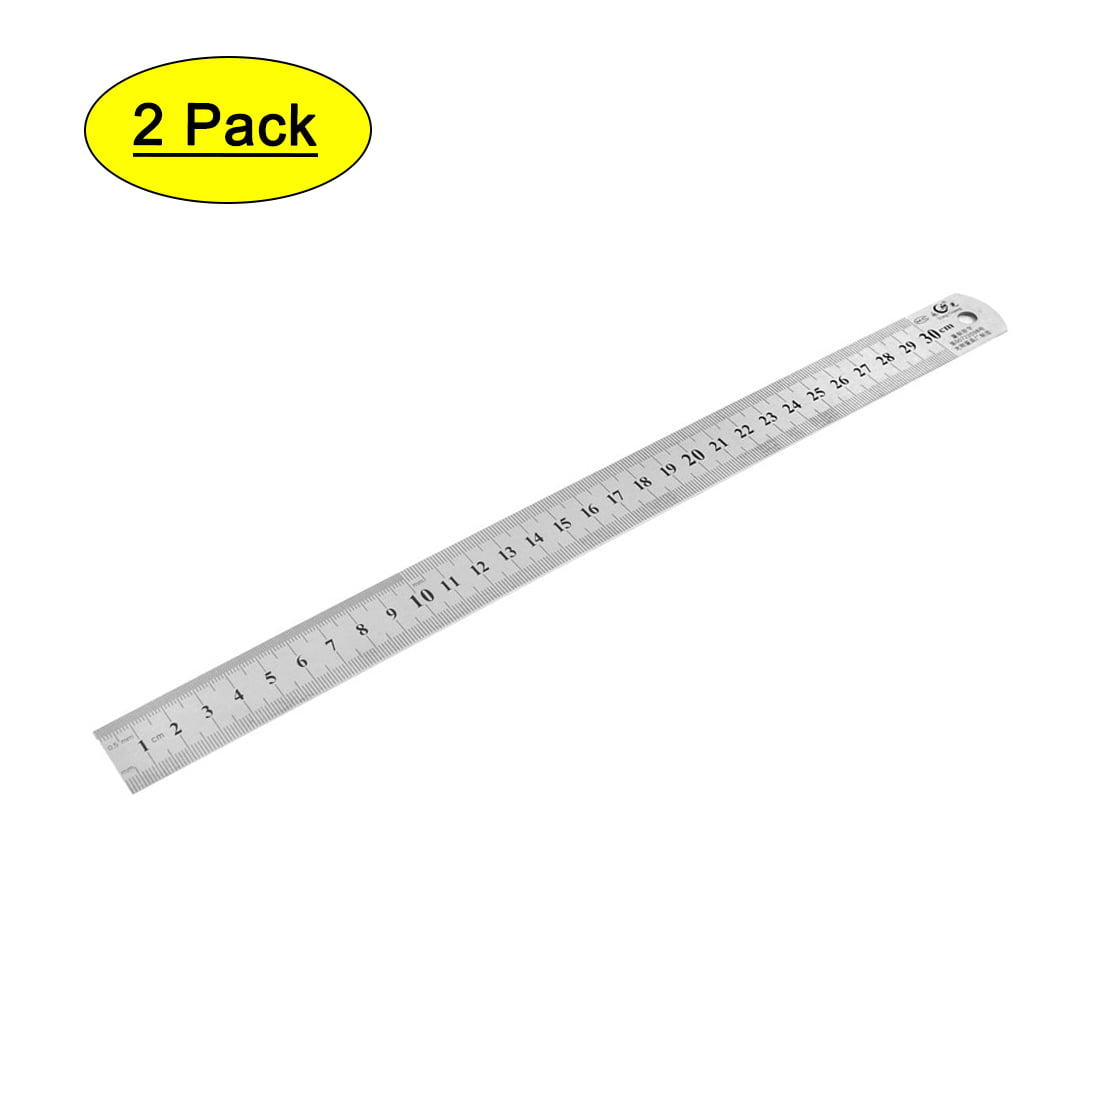 2pcs Dual Side Stainless Steel Straight Edge Ruler Measuring Tool 300mm 12 Inch